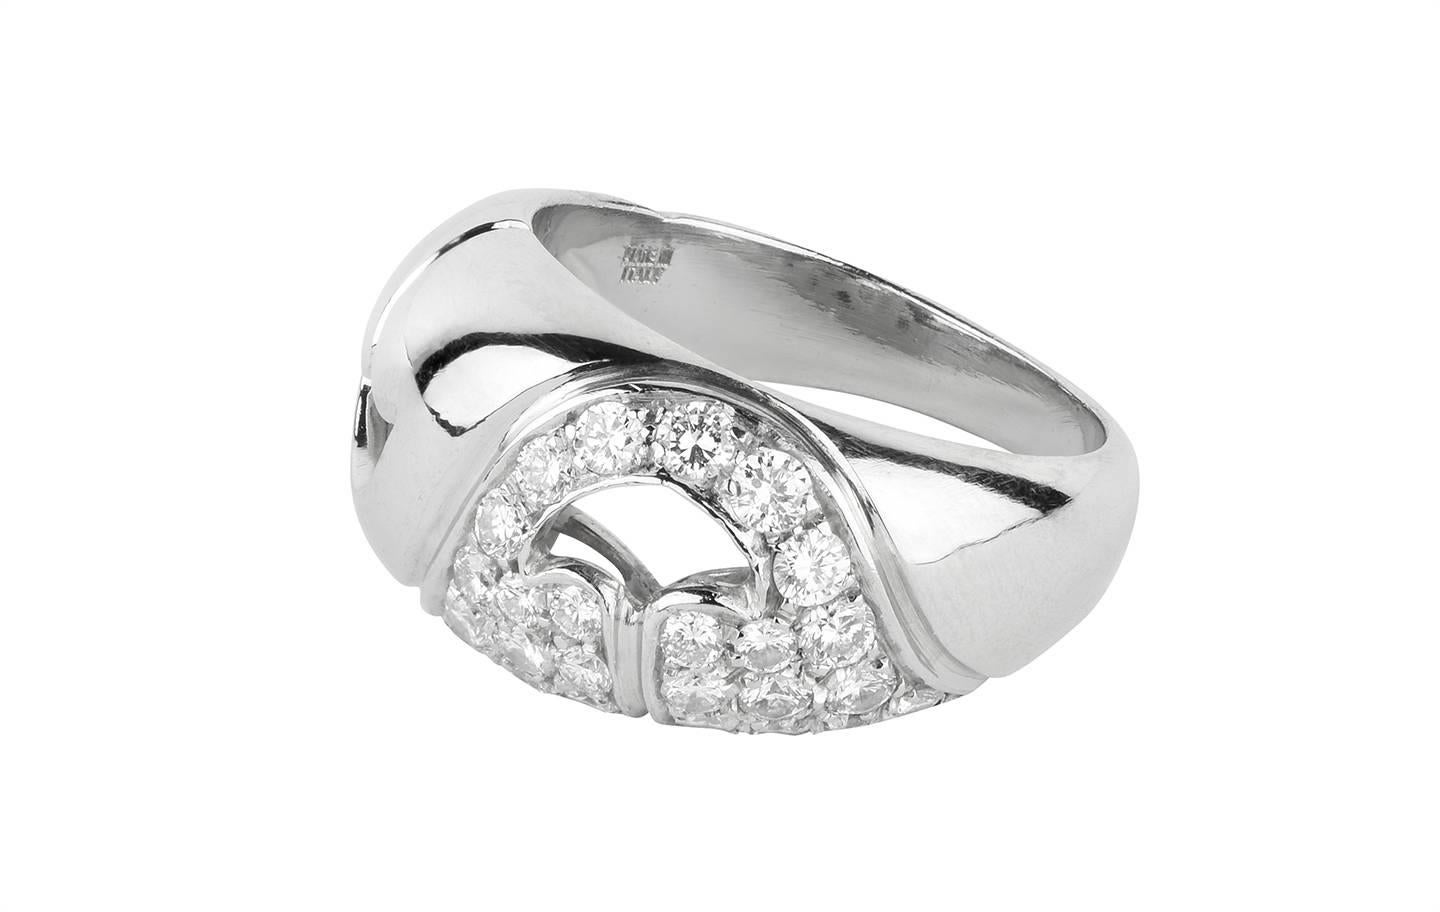 Bulgari Nuvole Collection ring holds 25 round brilliant cut diamonds at a total estimated weight of .75 carats. Beautiful open design. All made in platinum.

Ring is a size 6.50.